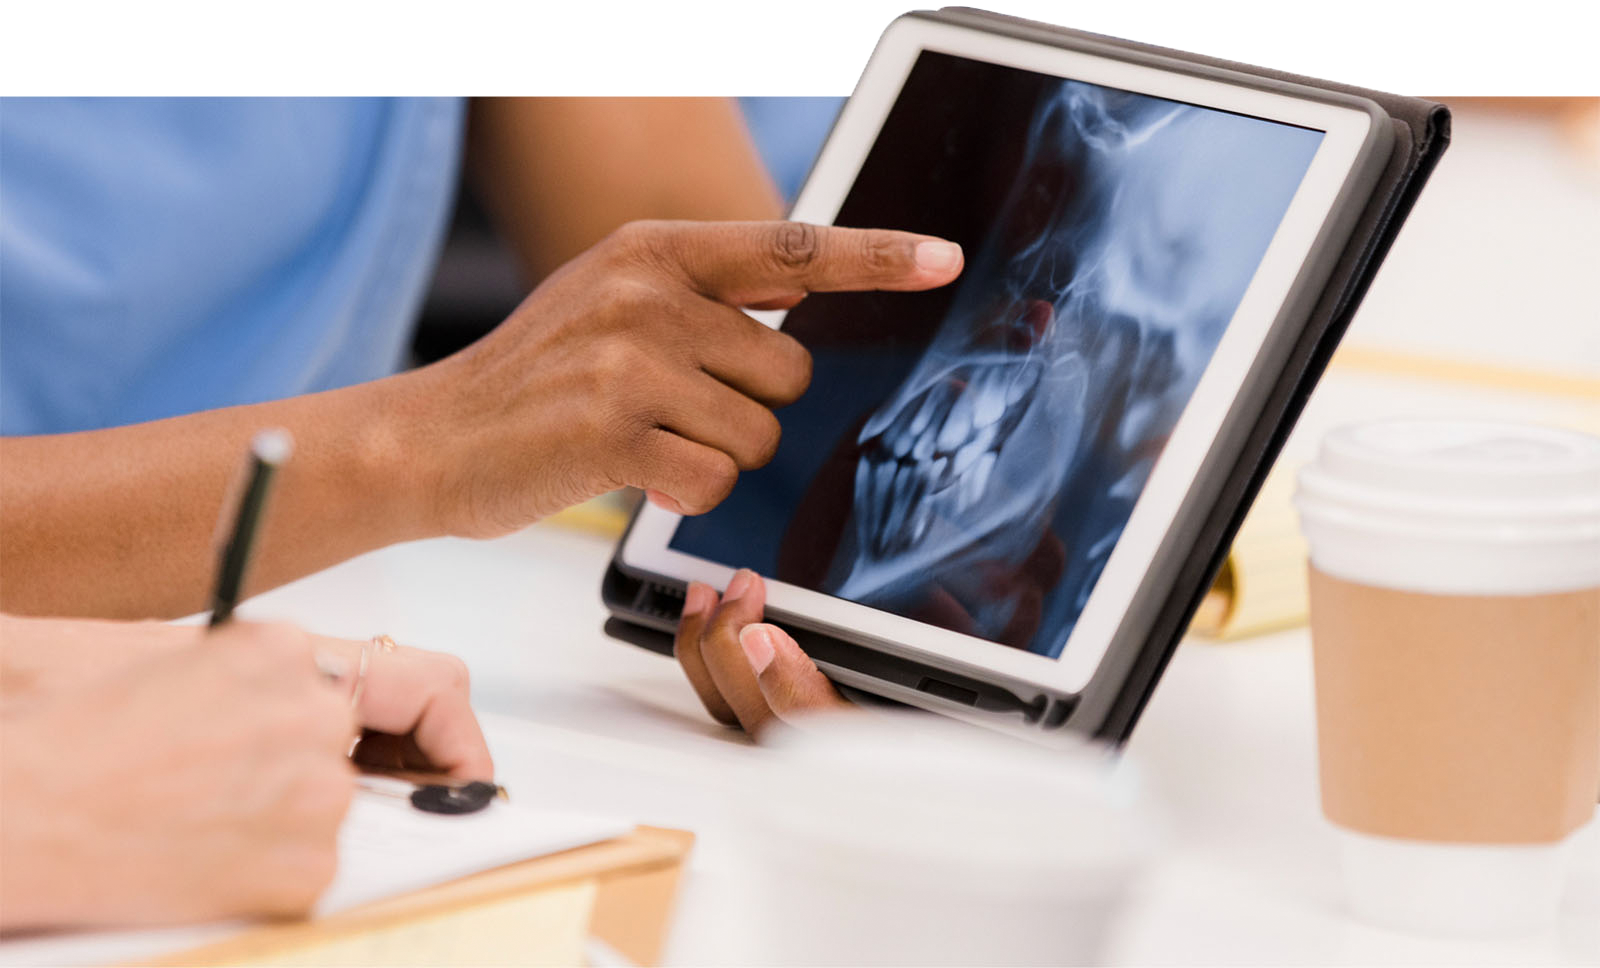 Clinician shows x-ray image on tablet